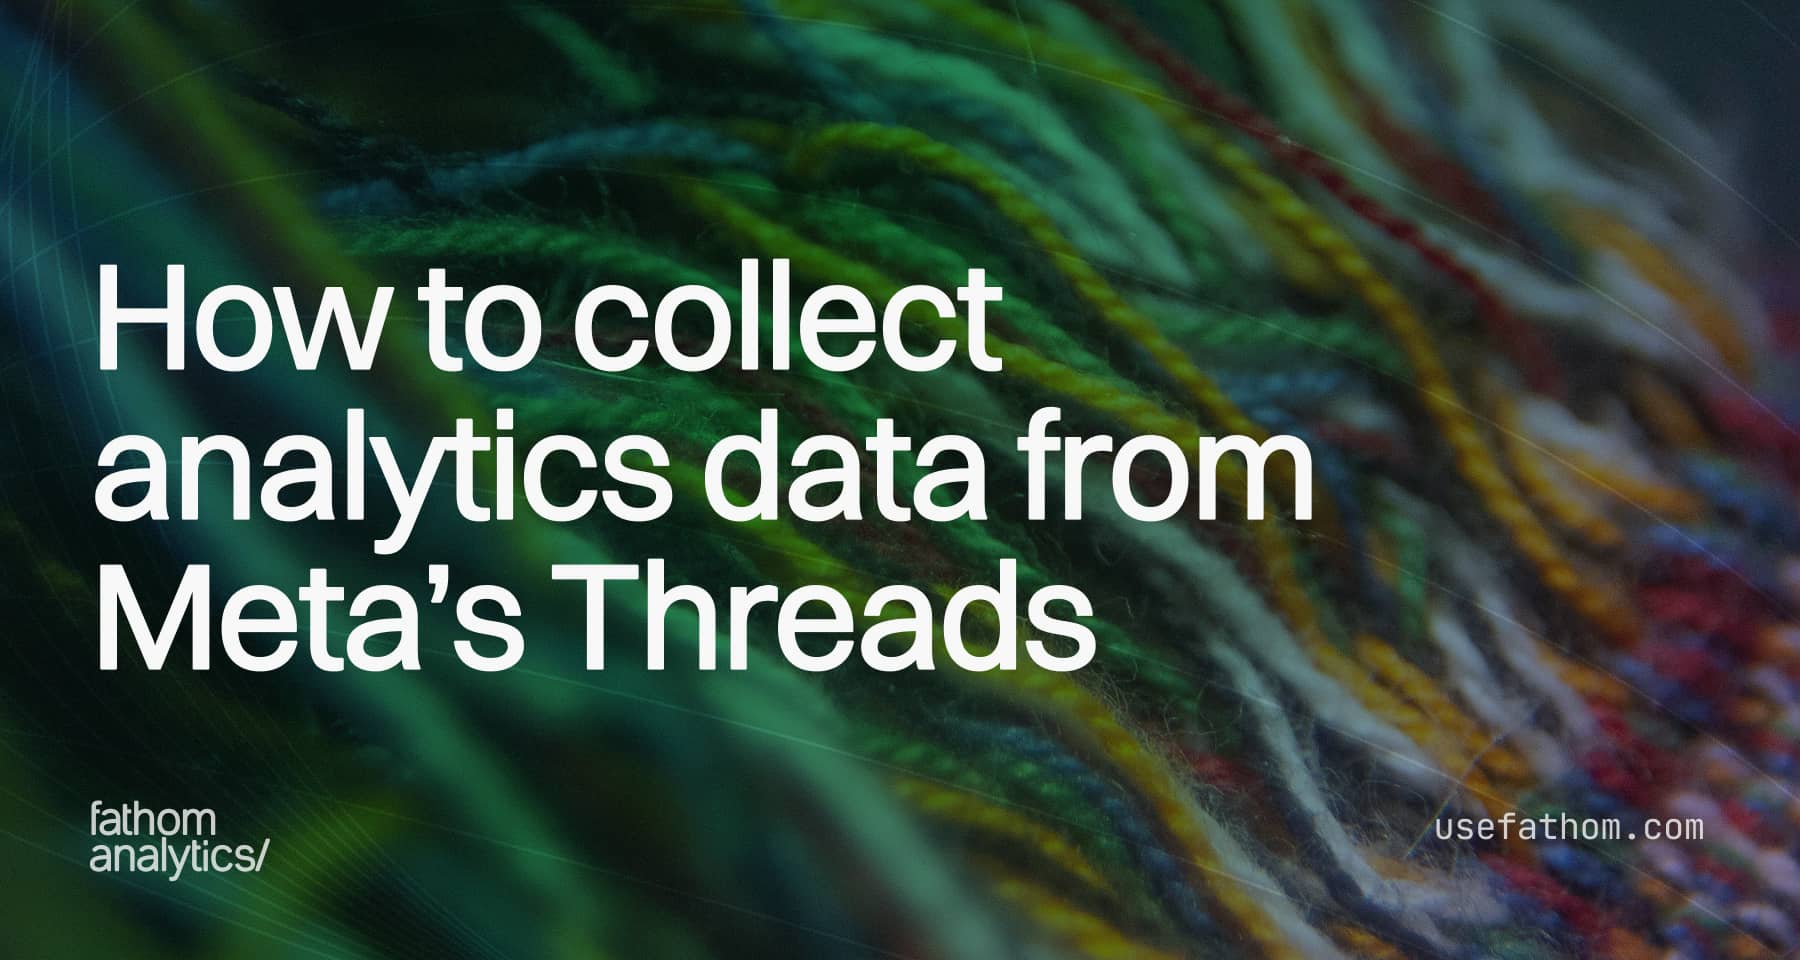 How to collect analytics data from Meta’s Threads